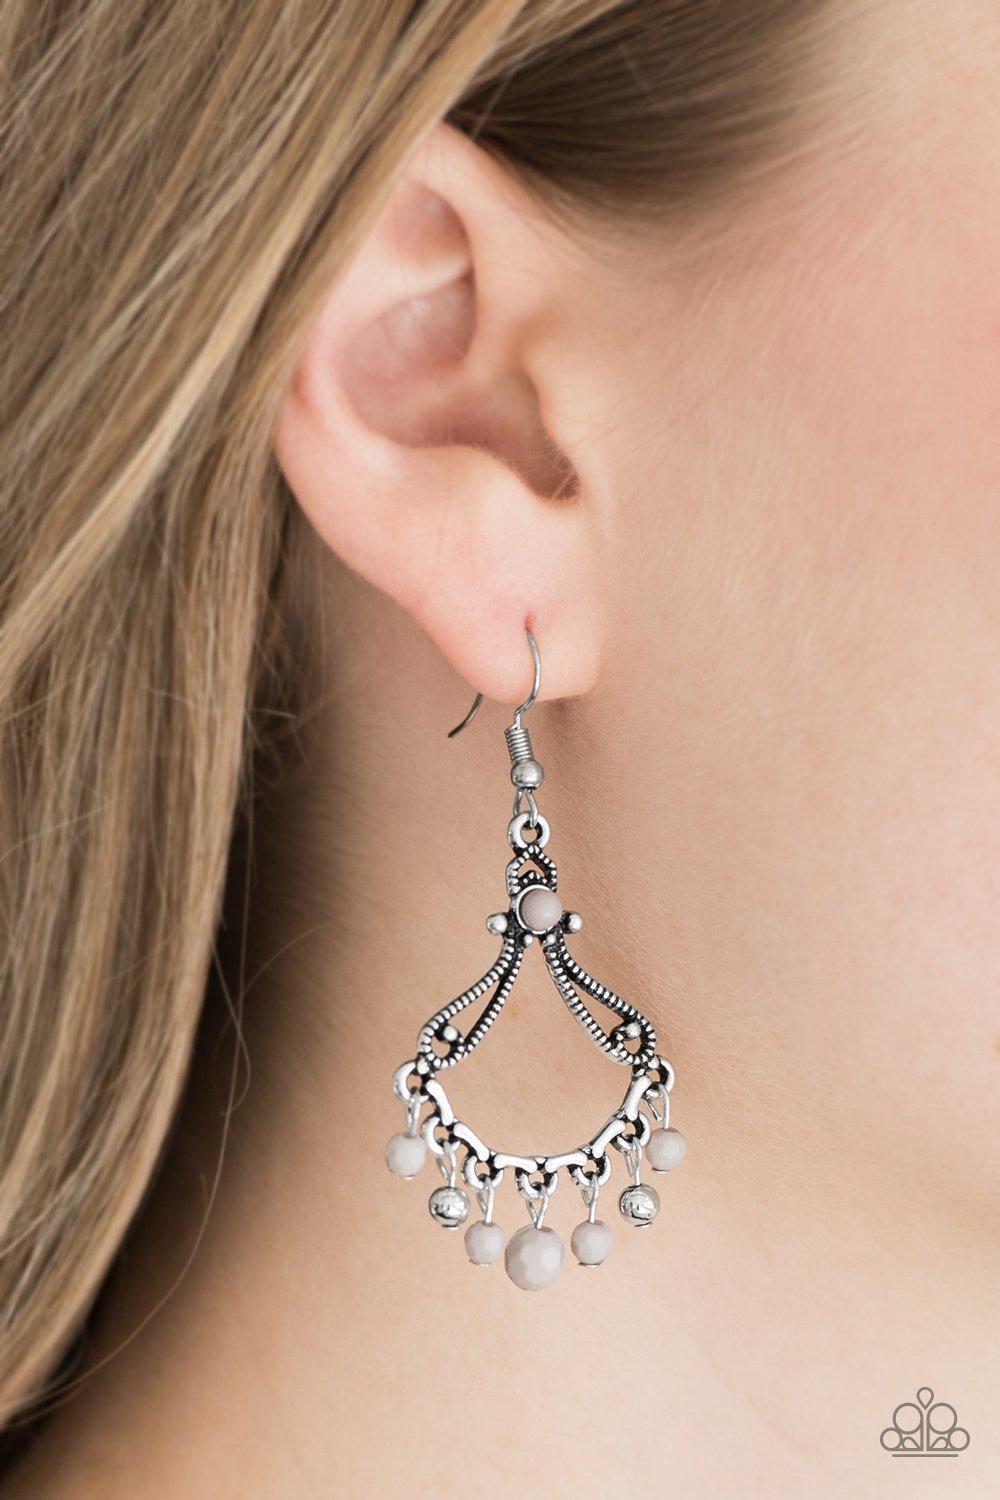 Dazzling Date Night Silver Earrings - Paparazzi Accessories-CarasShop.com - $5 Jewelry by Cara Jewels